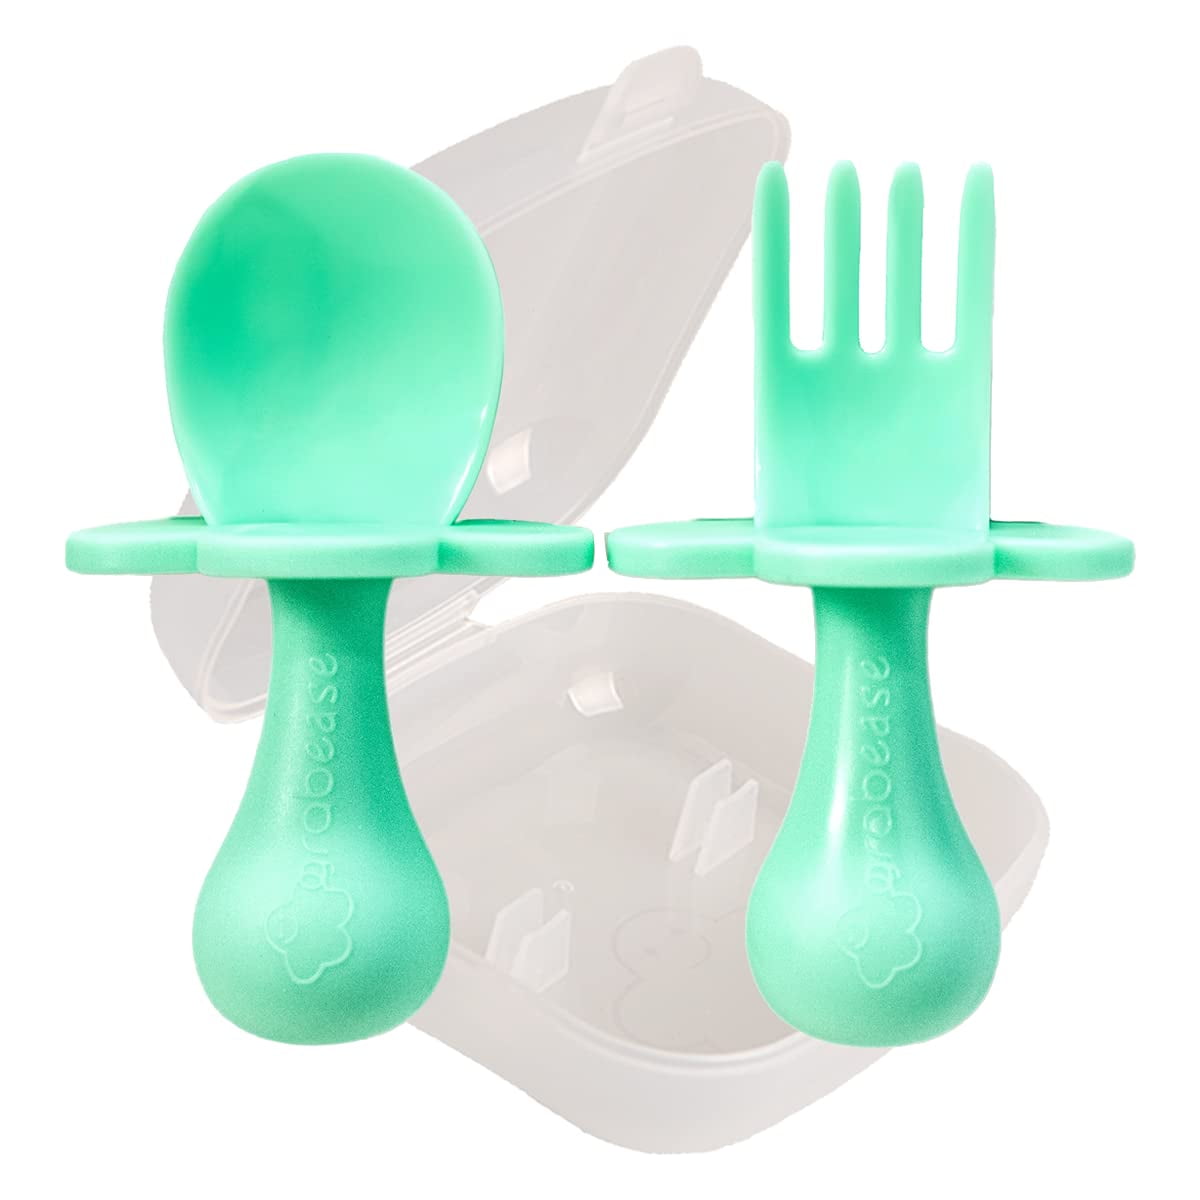 Baby Spoons - Self Feeding Set For Baby Led Weaning - Food Grade